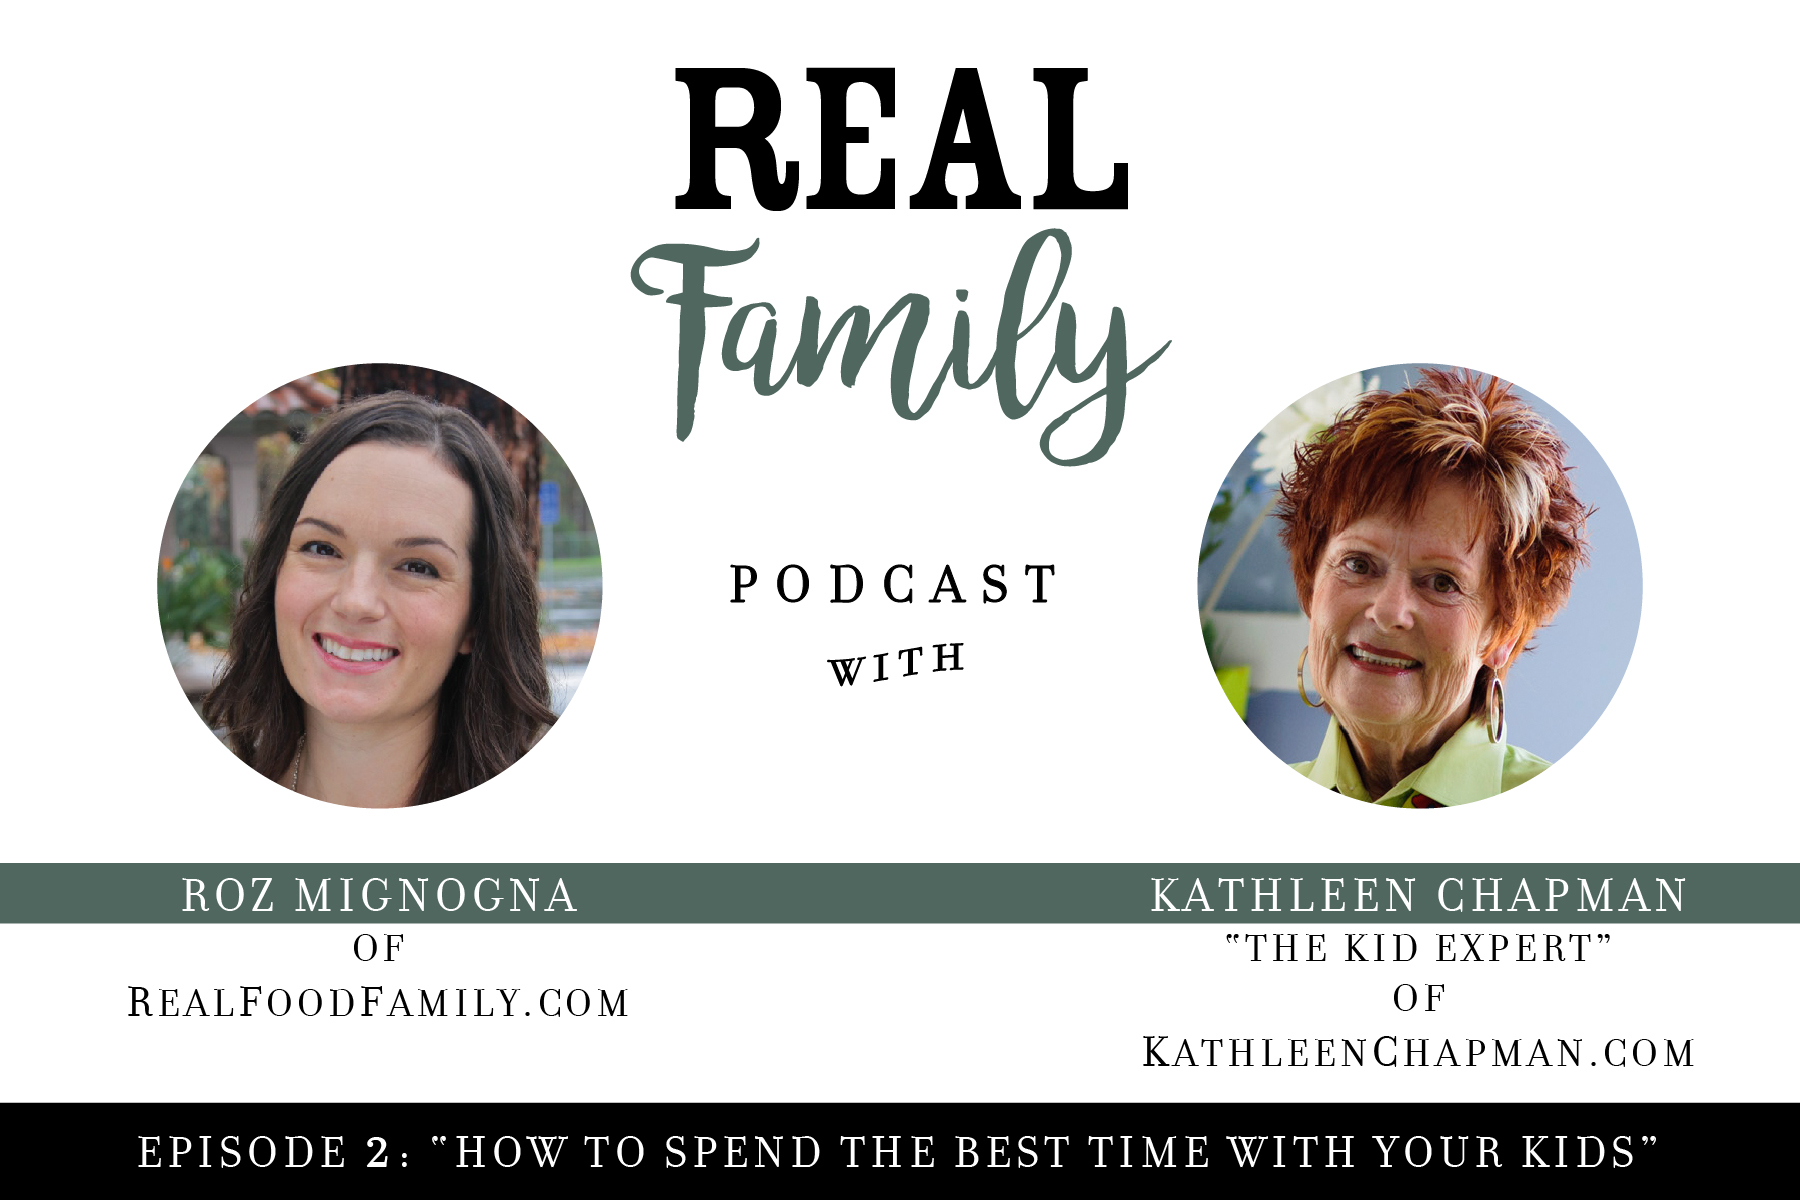 REAL FAMILY Podcast: Episode 2